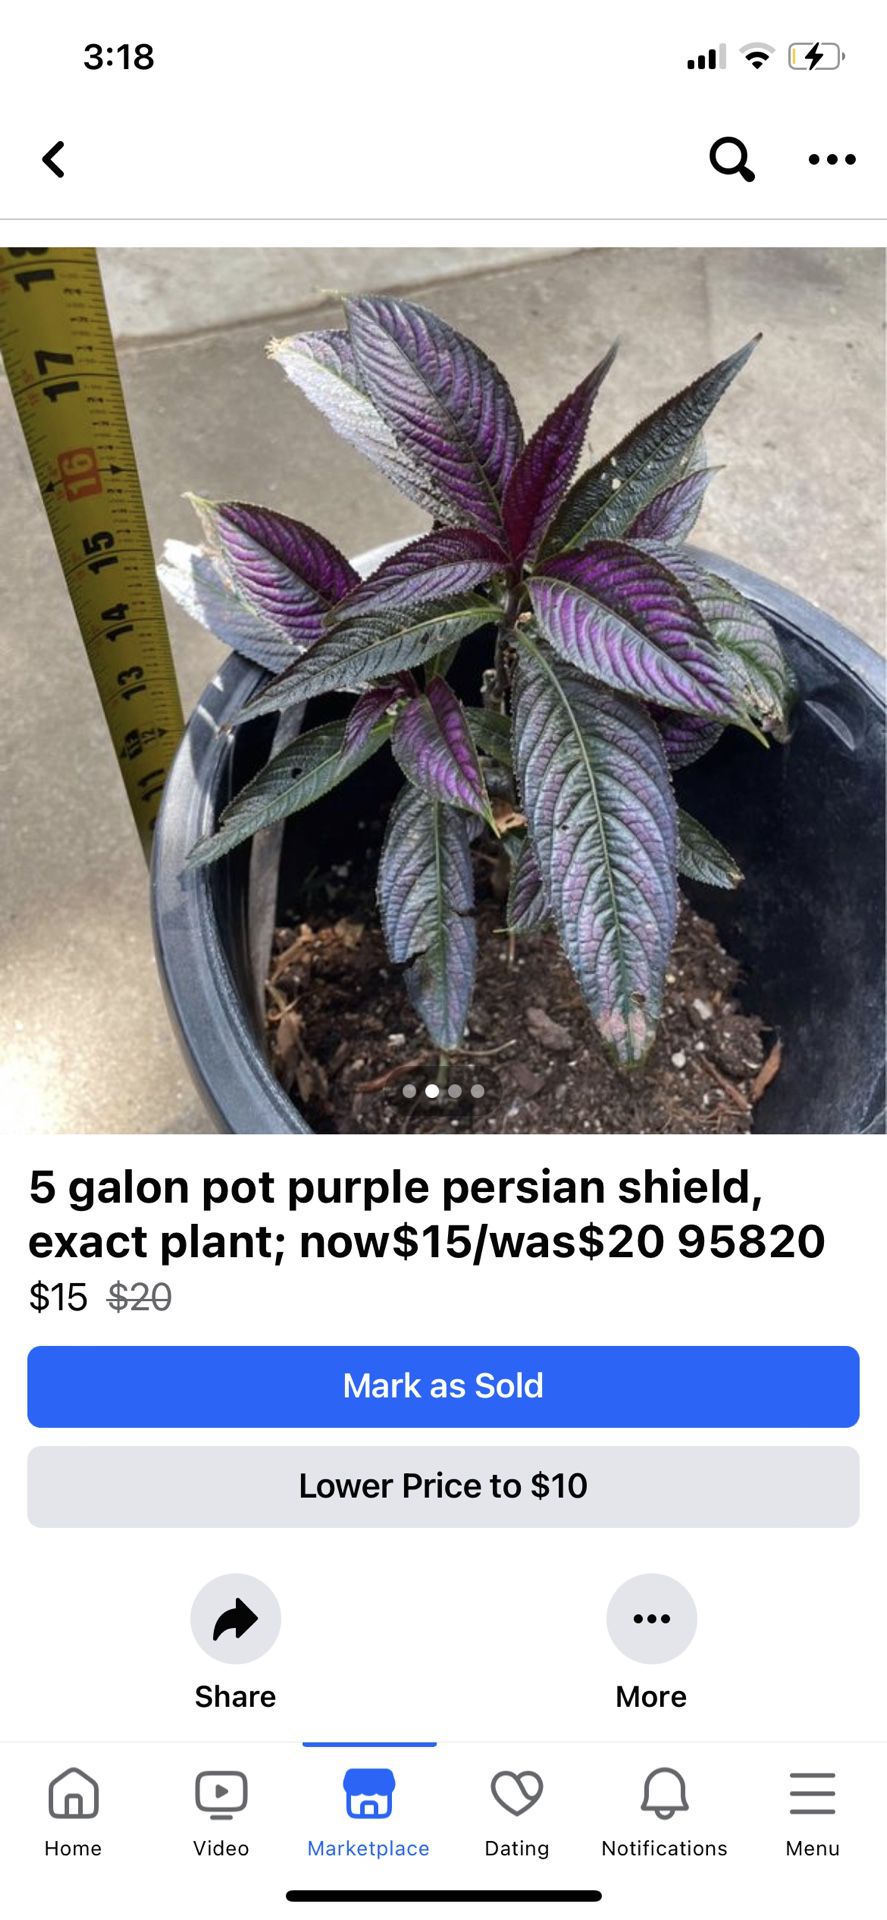 5 galon pot purple persian shield, exact plant; now$15/was$20 Price Firm; 95820